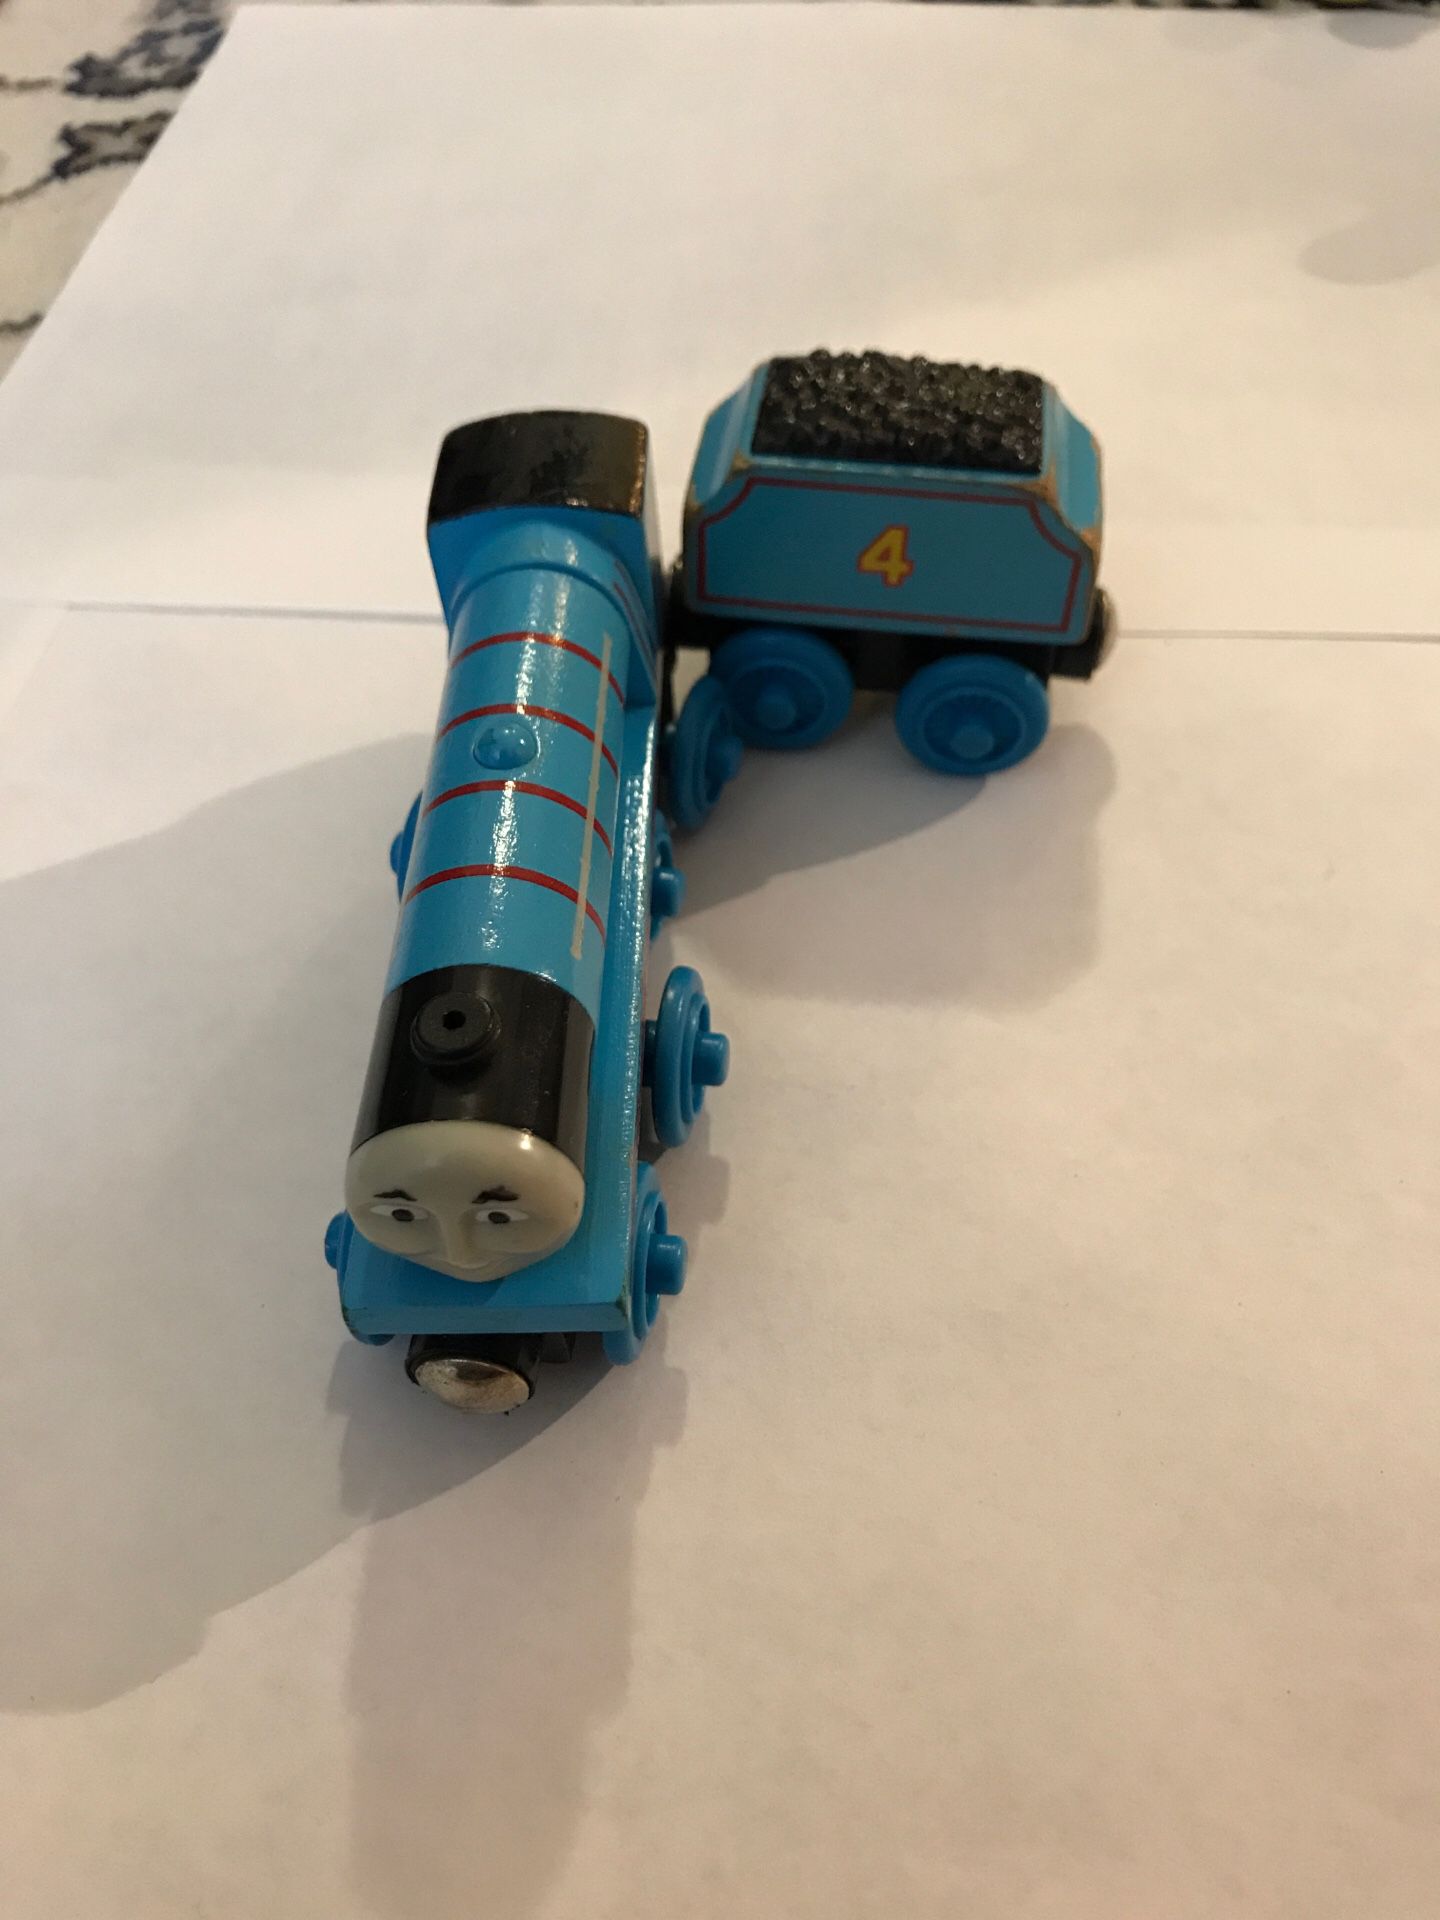 Thomas and his Friends. Wooden Railway Tank Engine - GORDON and his tender